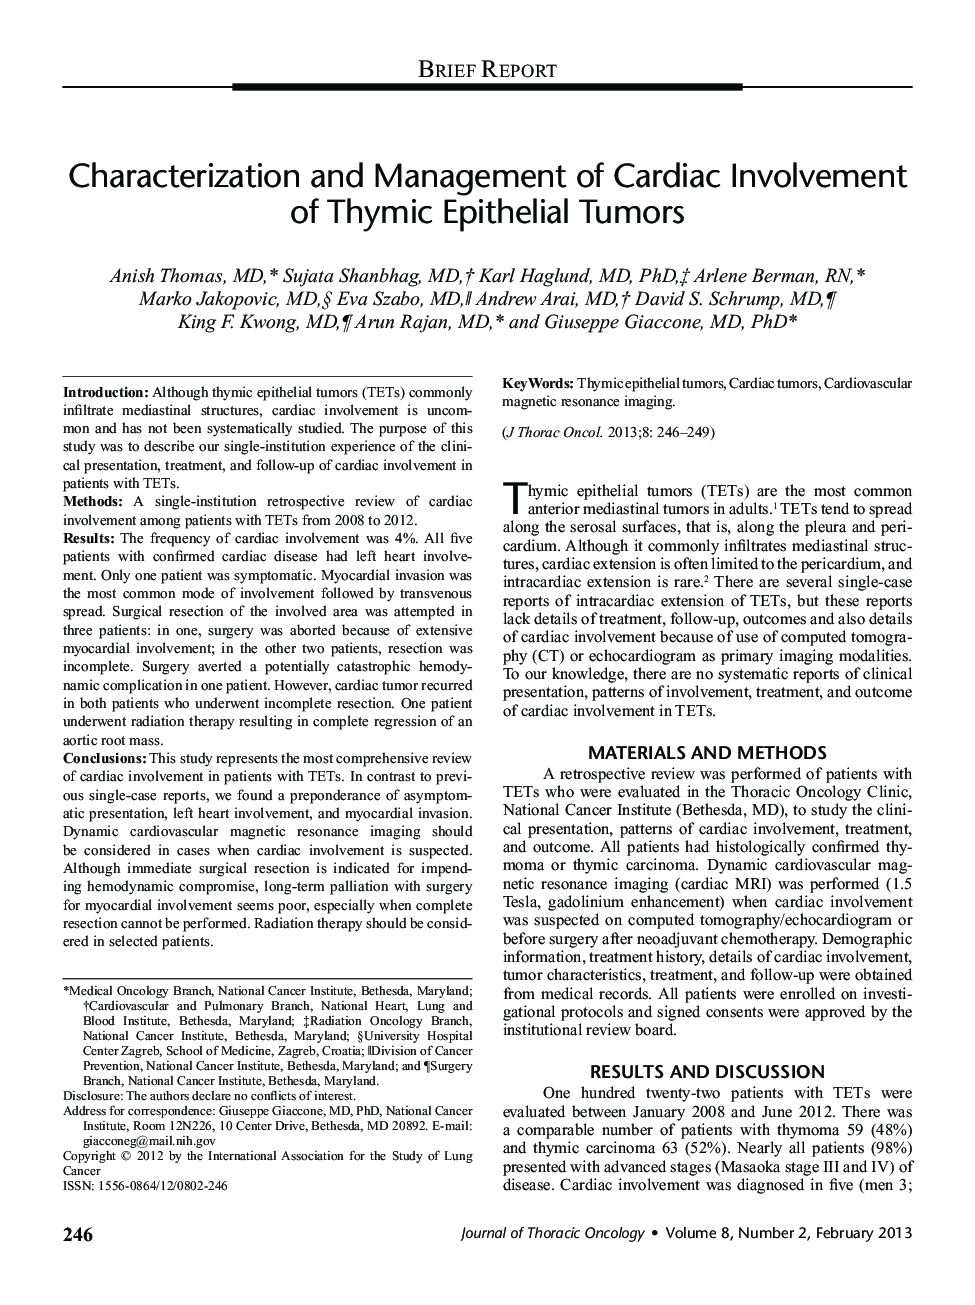 Characterization and Management of Cardiac Involvement of Thymic Epithelial Tumors 